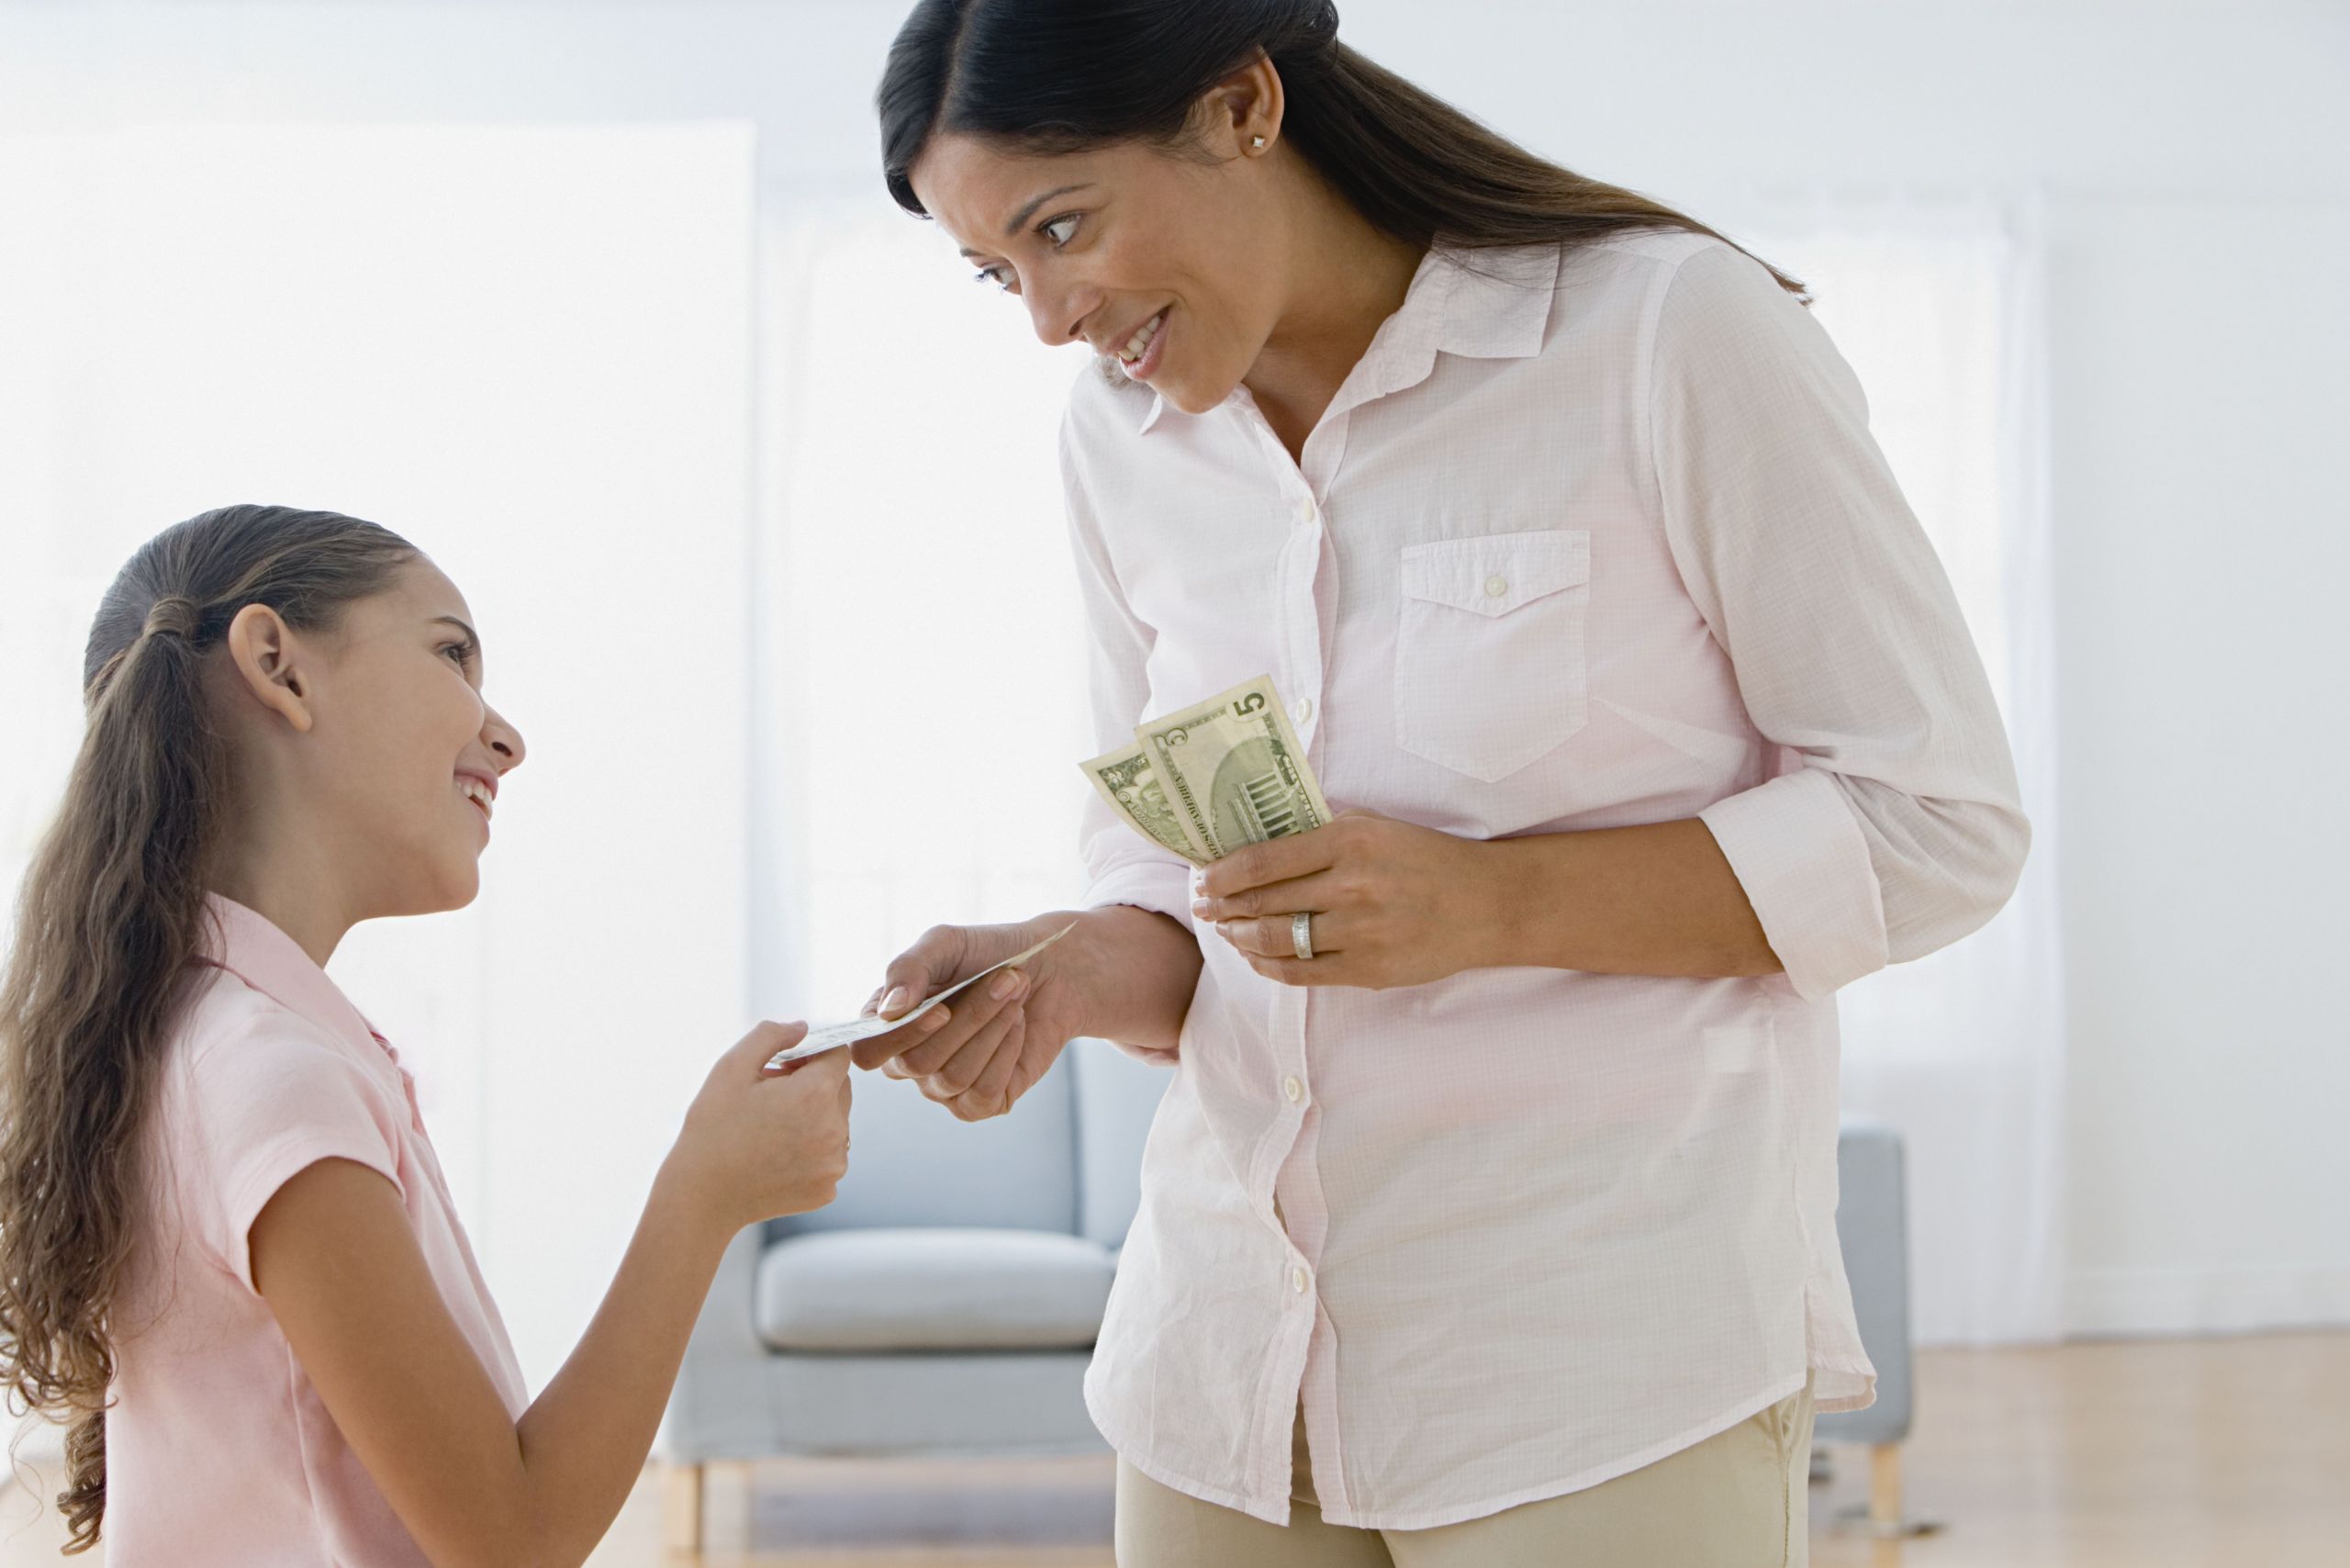 How To Gift Money To Child
 The Right Way to Gift Money to Your Kids